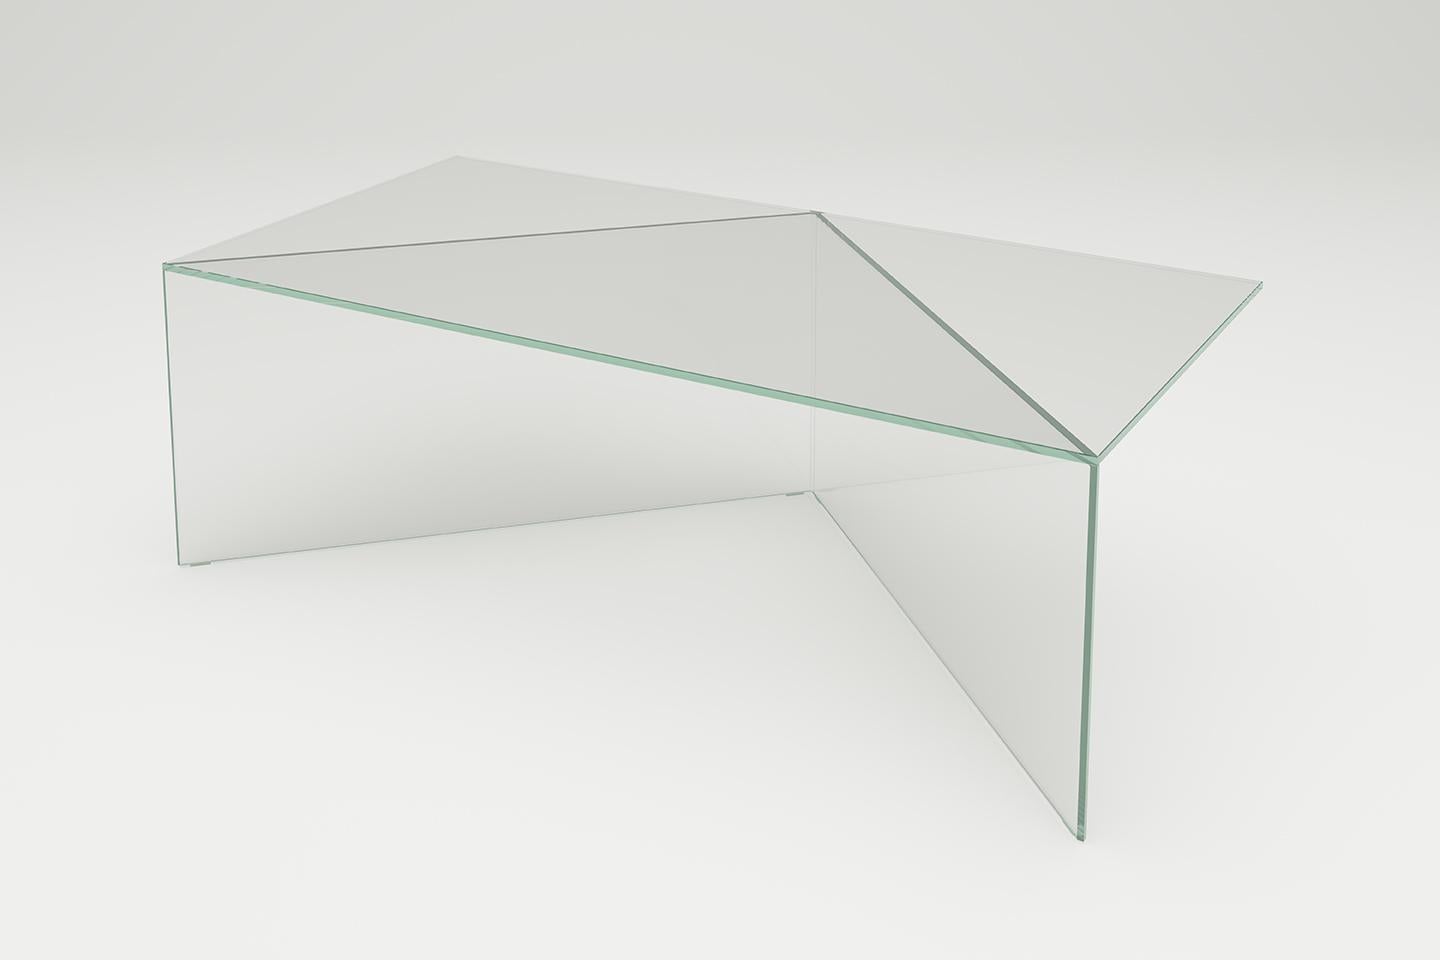 White clear glass poly oblong coffe table by Sebastian Scherer
Dimensions: D120 x W30 x H 40 cm
Materials: Solid coloured glass.
Weight: 34.4 kg.
Also available: Colours: Clear white (transparent) / clear green / clear blue / clear bronze / clear